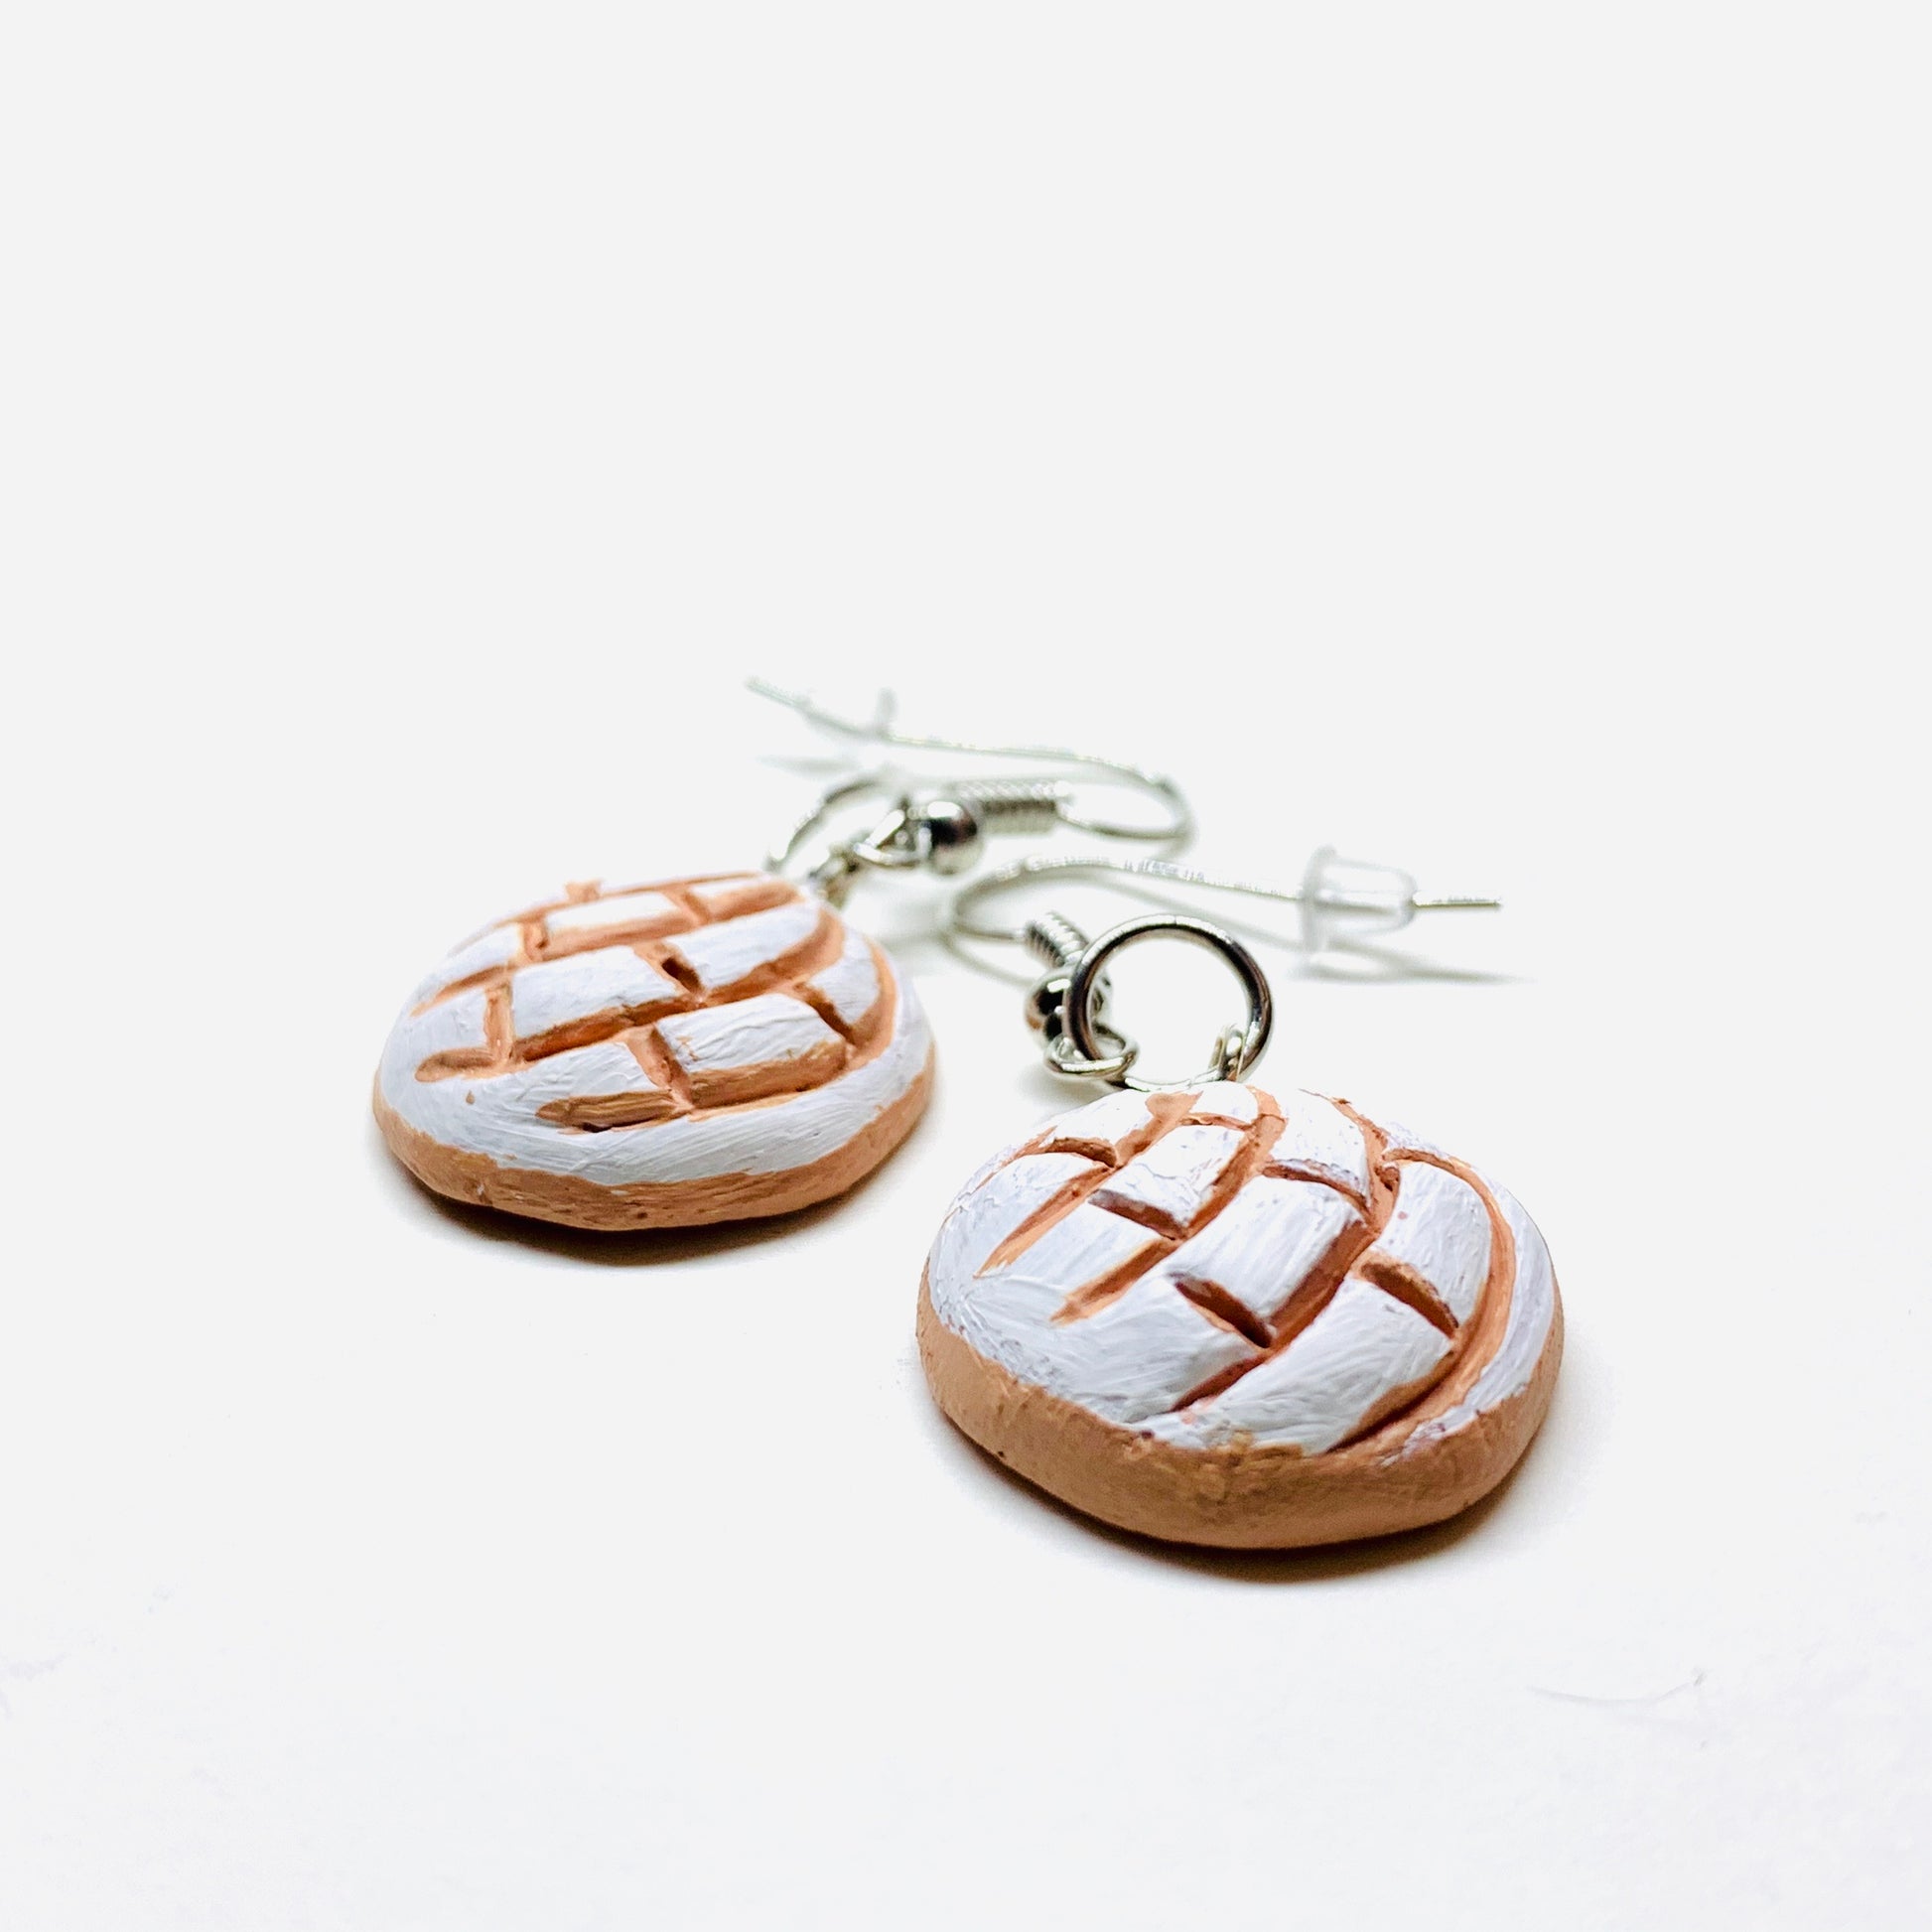 Concha Earrings (Conchitas Clay Earrings): Handmade hand painted natural clay drop and dangle concha earrings (sweet bread) food jewelry. Mexican earrings inspired by Frida Kahlo for fridamaniacs and fridalovers. Lovely girl's birthday sweet sixteen gift idea